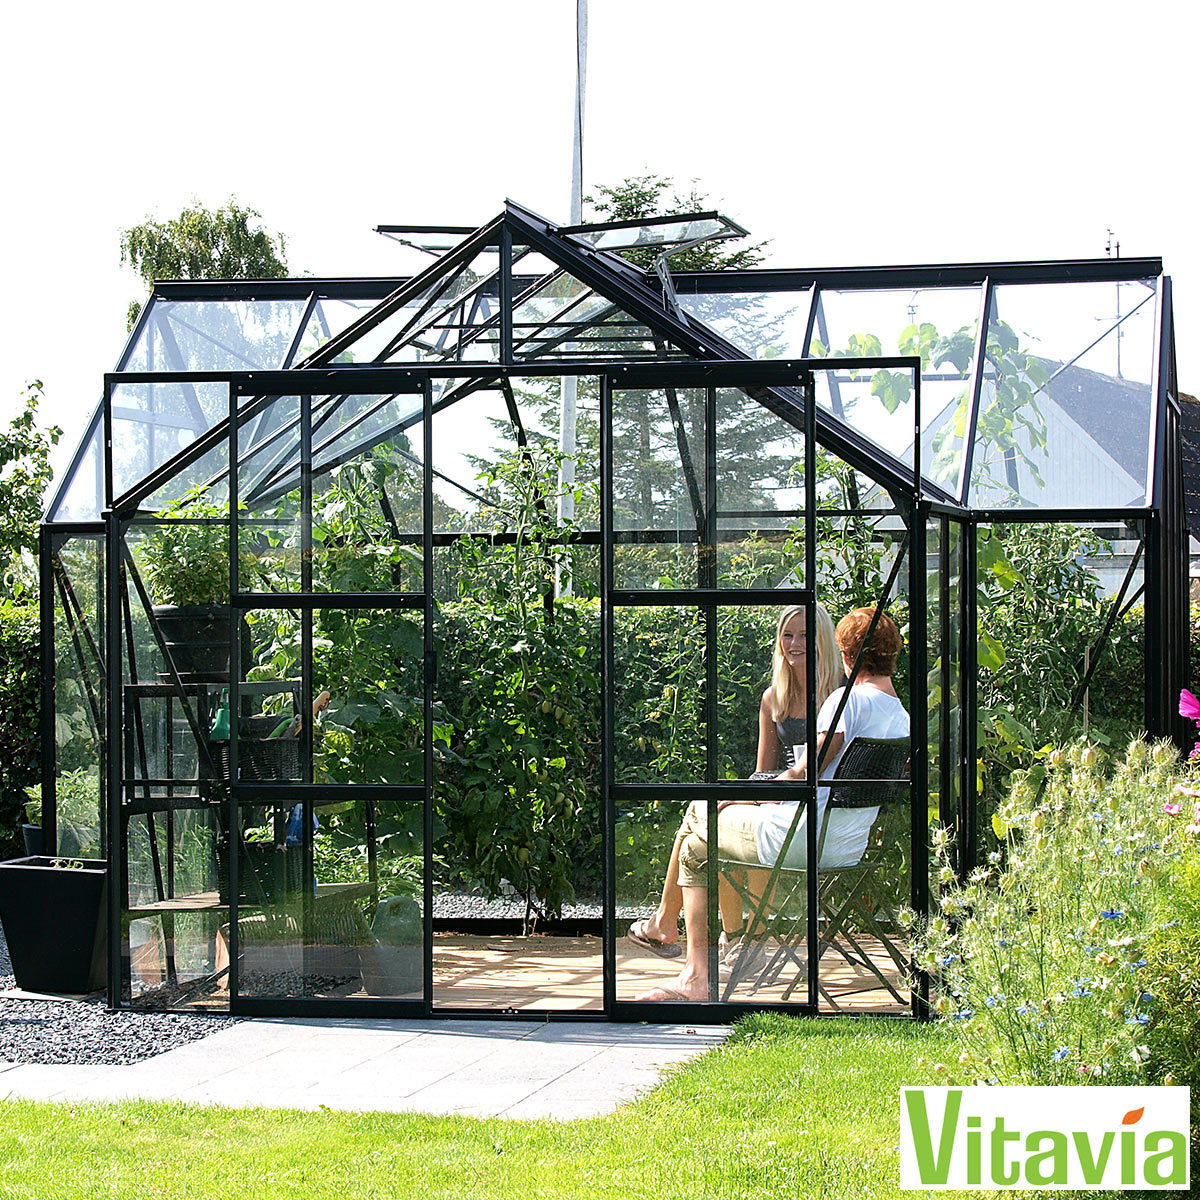 Installed Vitavia Nevada 13000 12.7 X 12.7ft Greenhouse Package